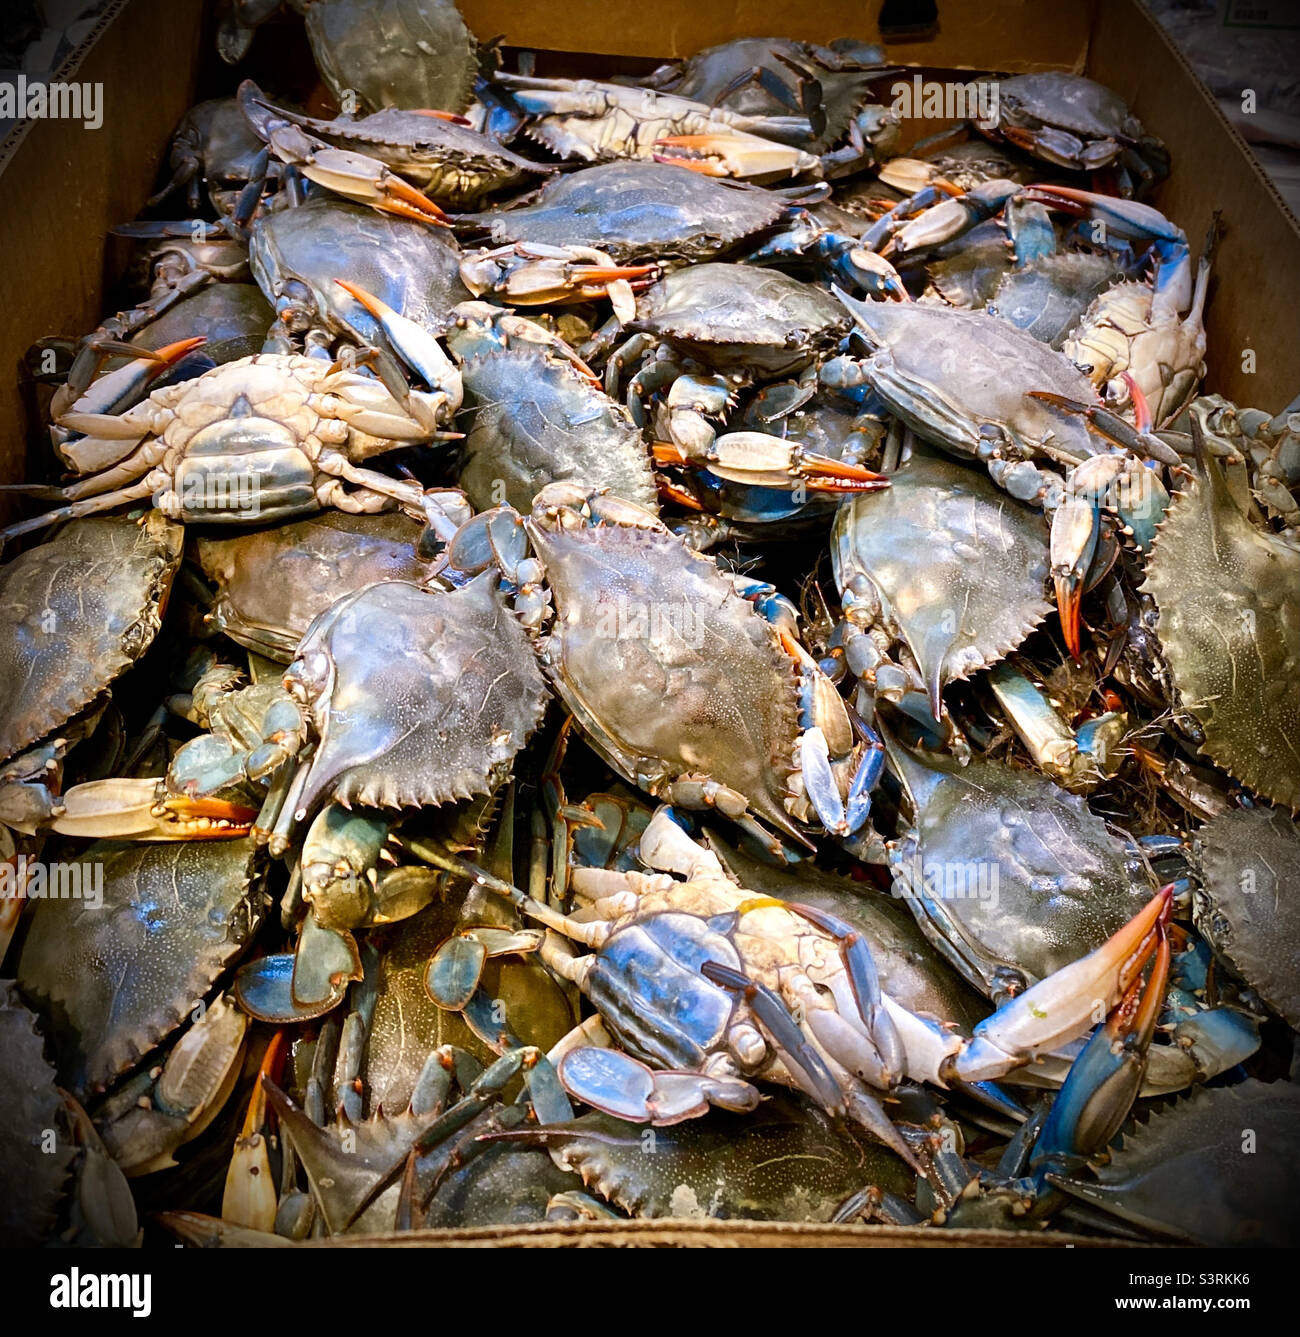 Live east coast blue crabs in the market Stock Photo